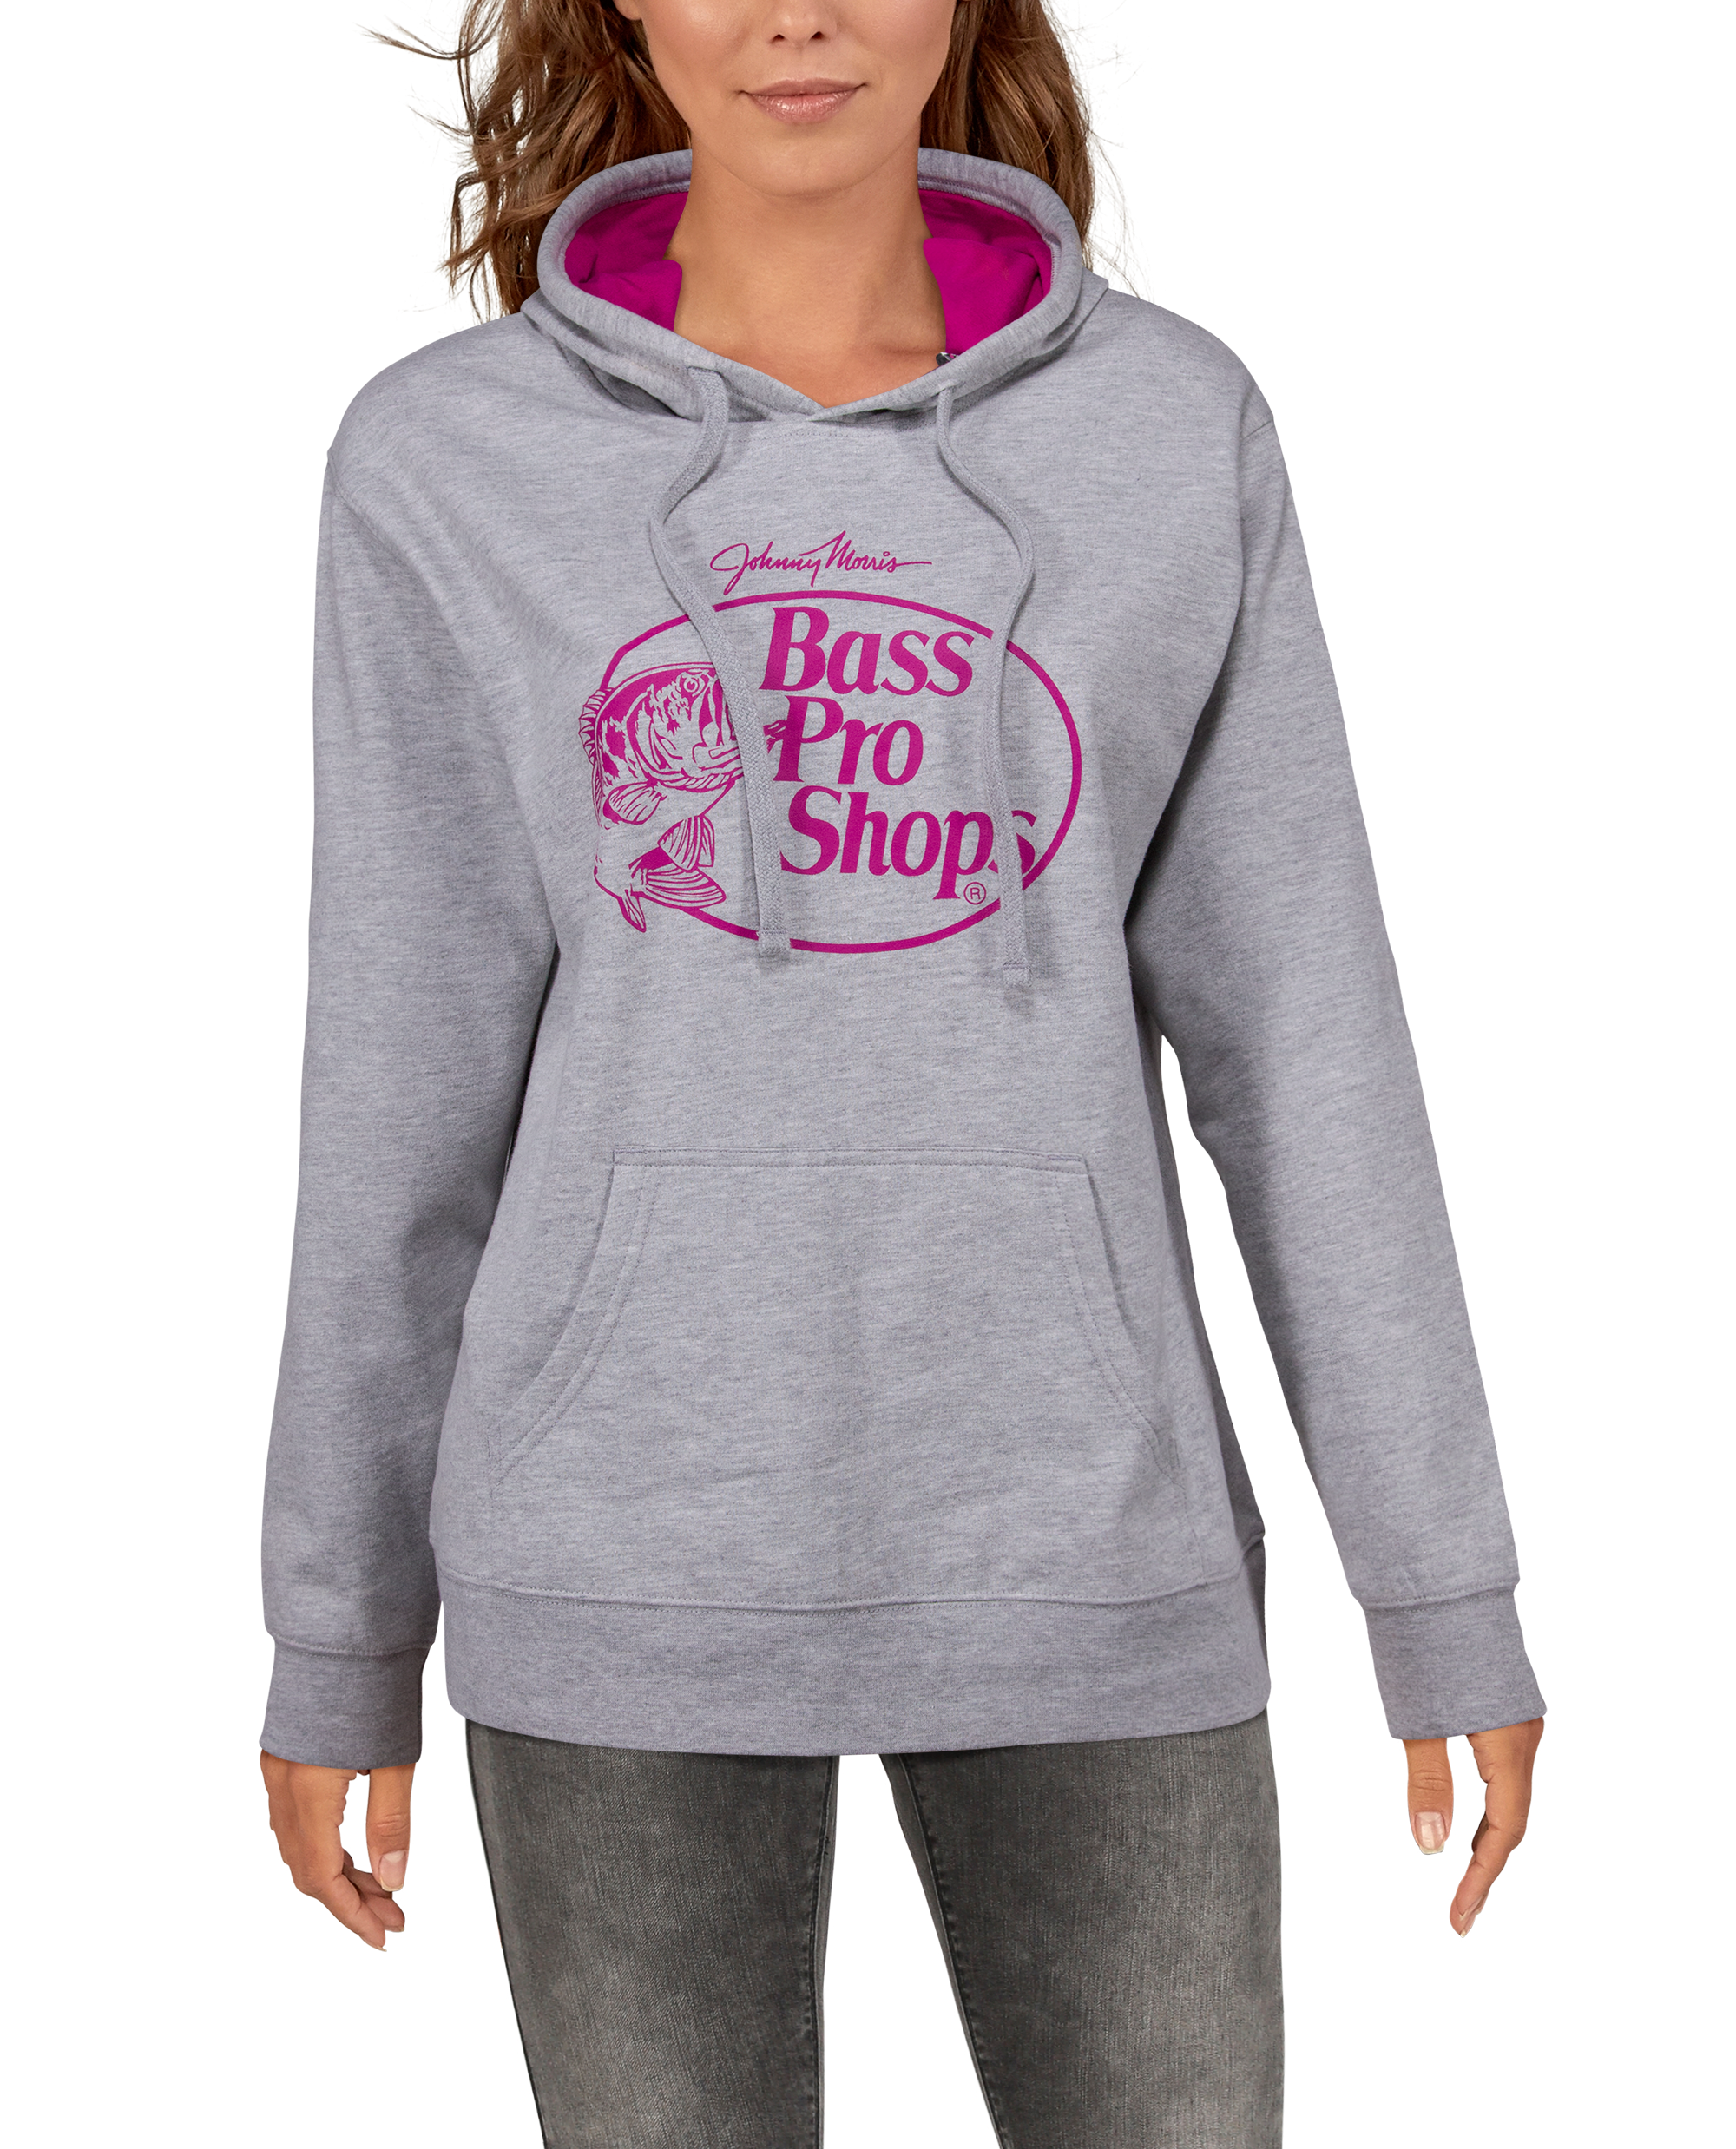 Bass Pro Shops Promo Long-Sleeve Hoodie for Ladies | Bass Pro Shops